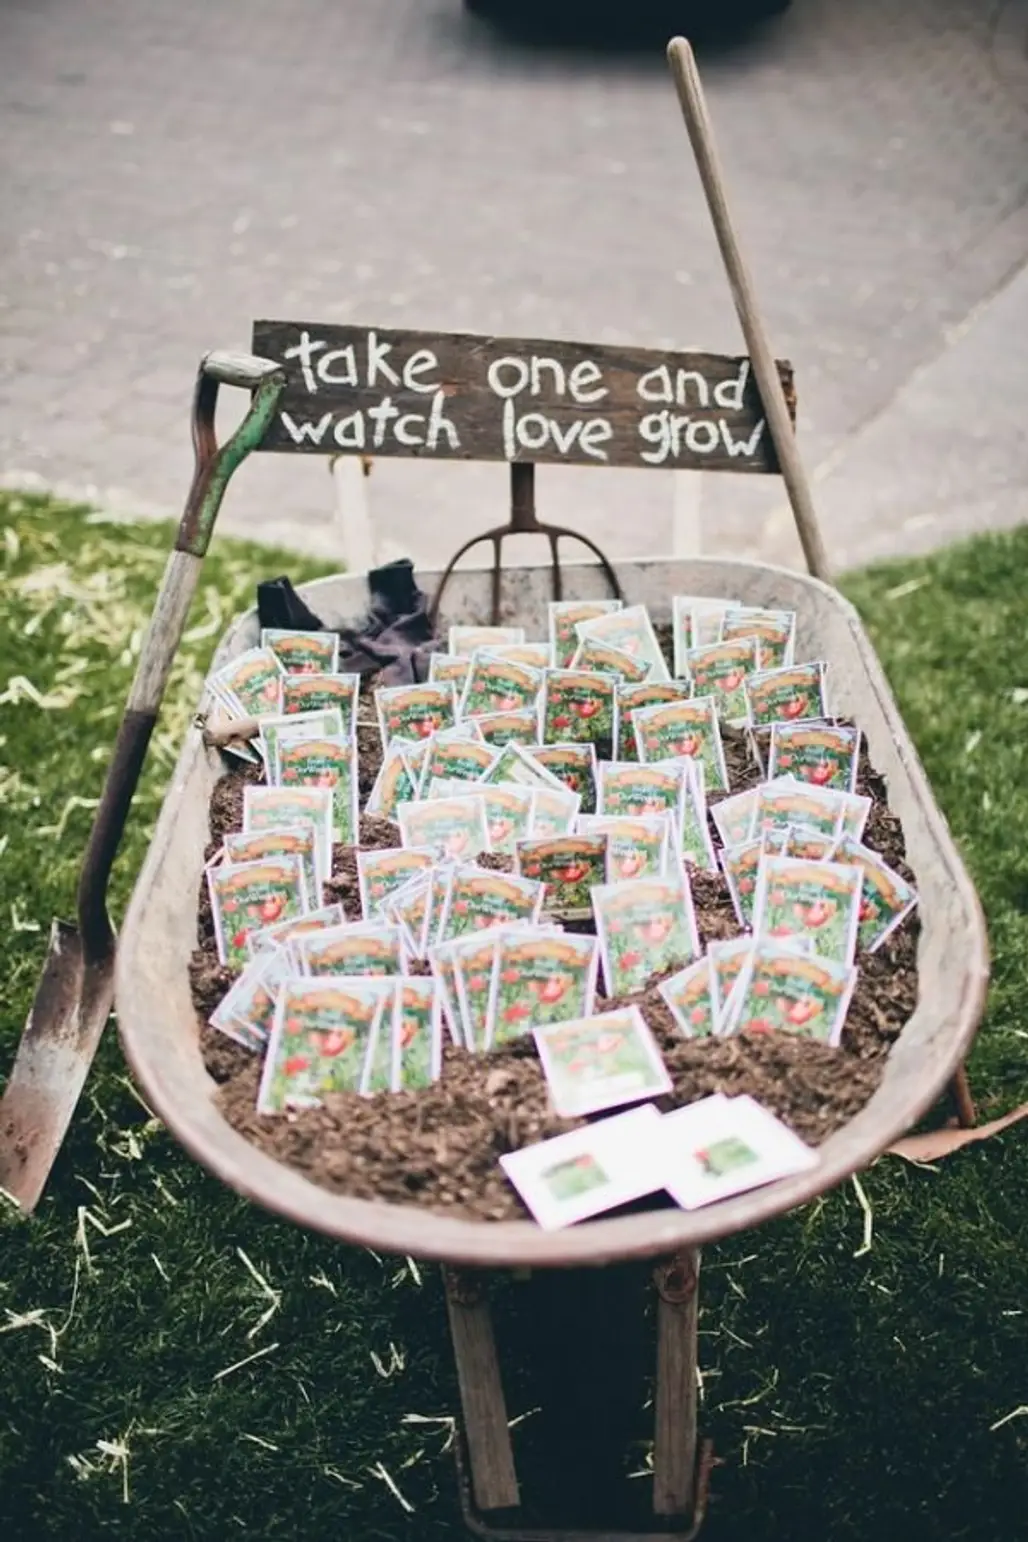 Get Creative with Natural Favors